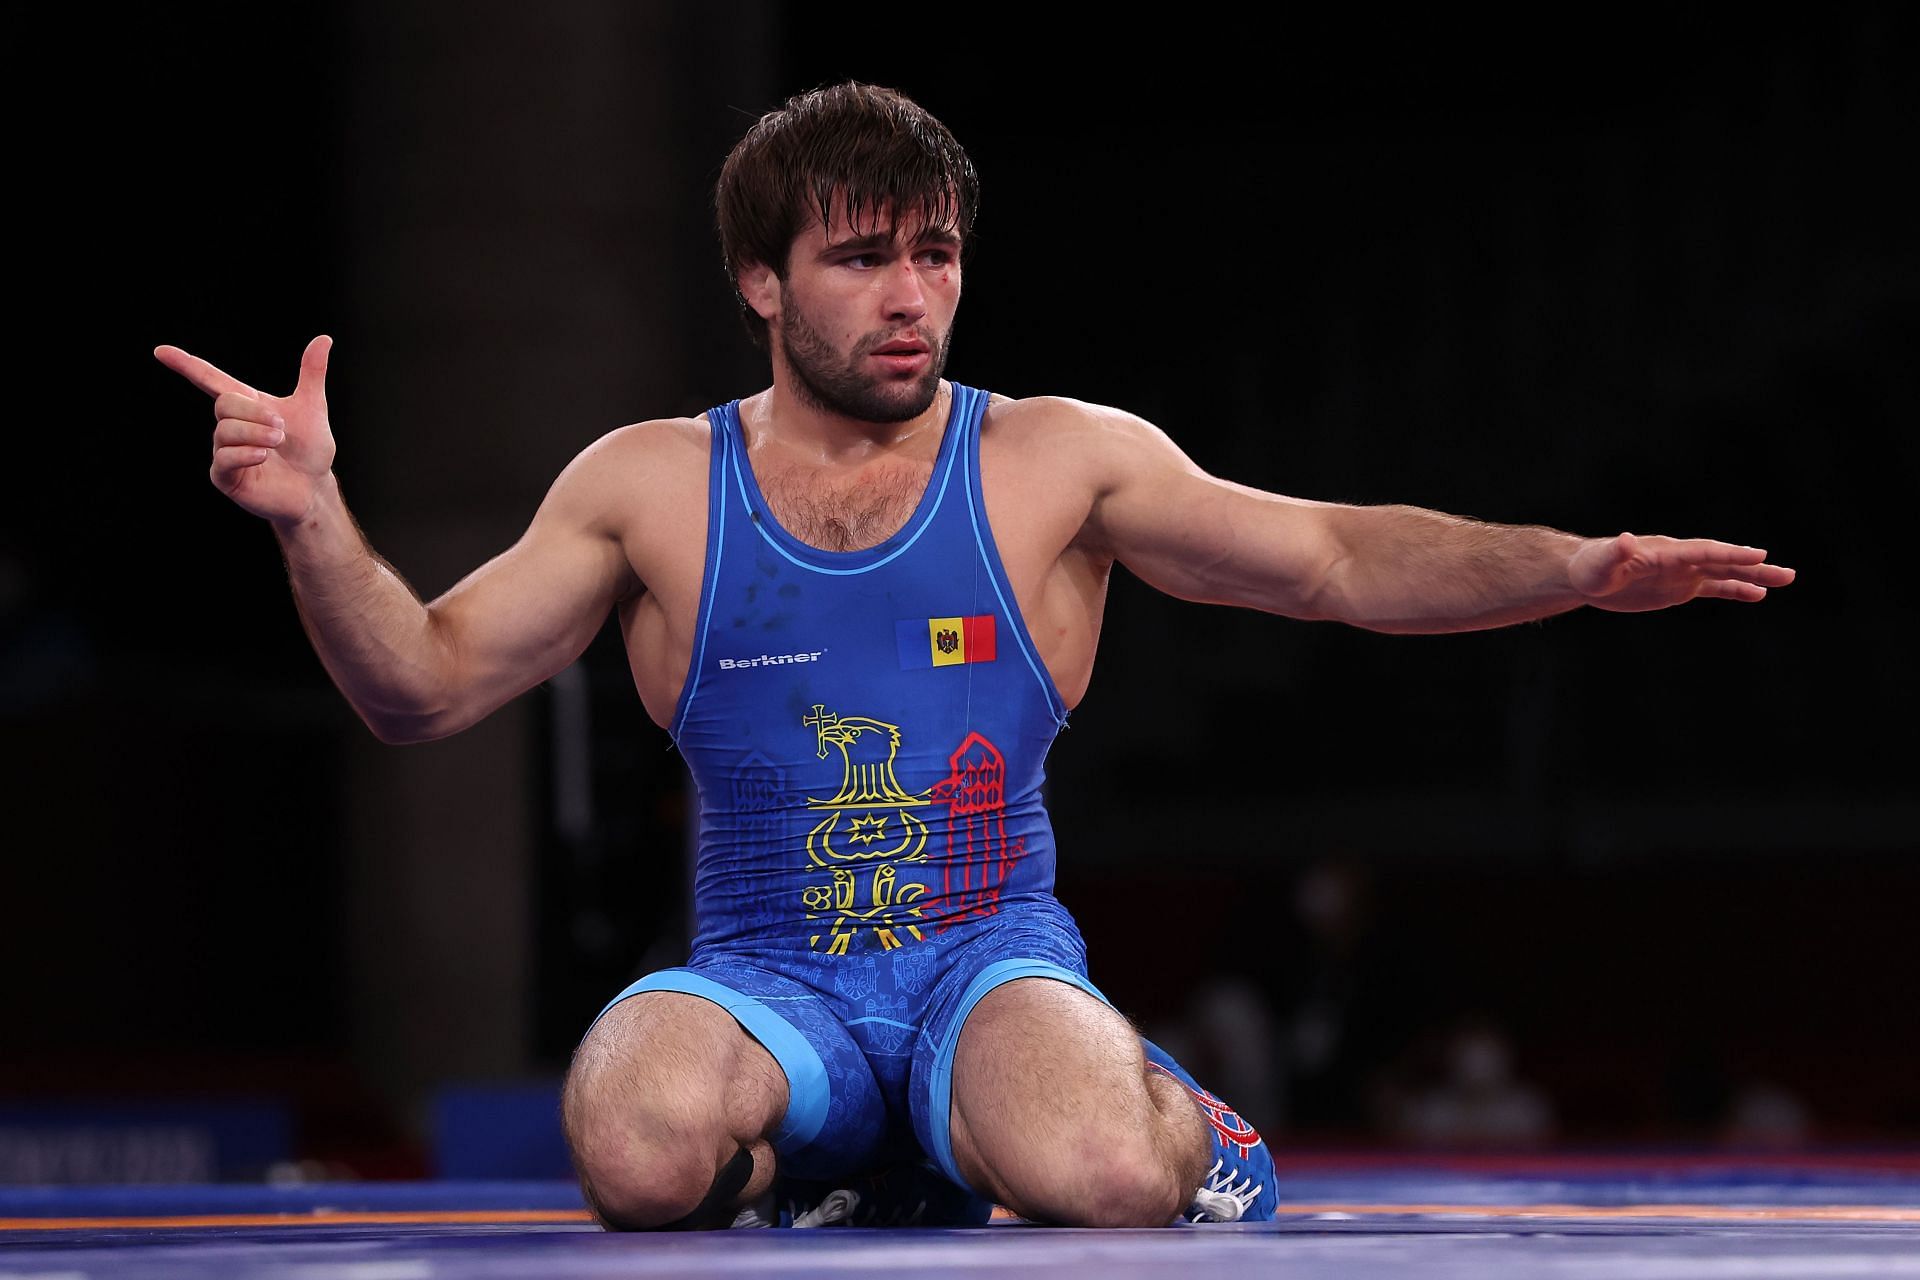 Victor Ciobanu secured a spot to compete in the 60kg wrestling event at the 2024 Paris Olympics.